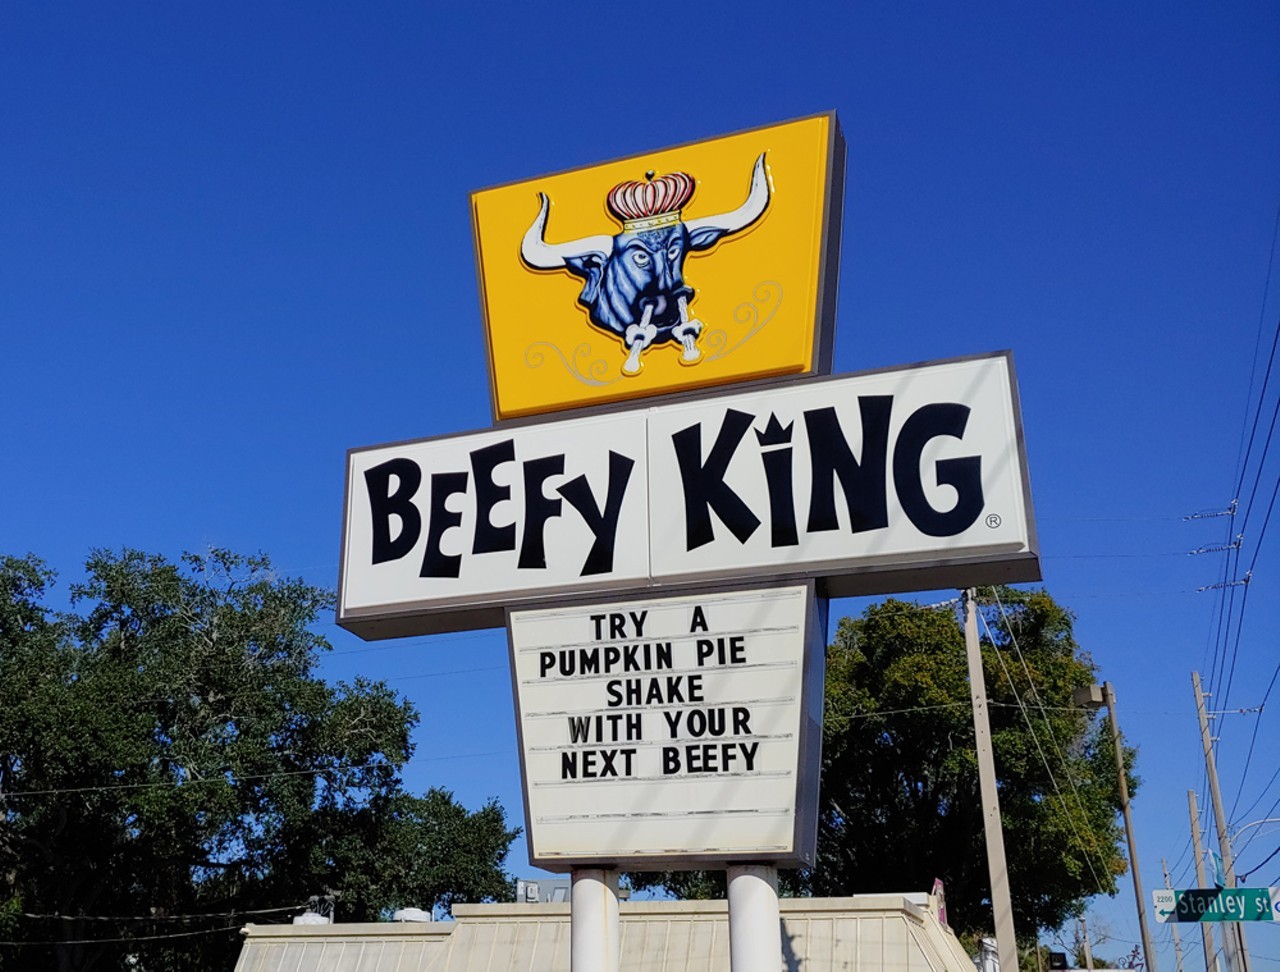 Beefy King
424 N Bumby Ave., Orlando
This Central Florida meaty institution has been filling hungry Orlandoans' stomachs with the best roast beef (and turkey, ham or pastrami) sandwiches since 1968. Beefy King also offers milkshakes and their own spin on the classic tater tot, Beefy Spuds.